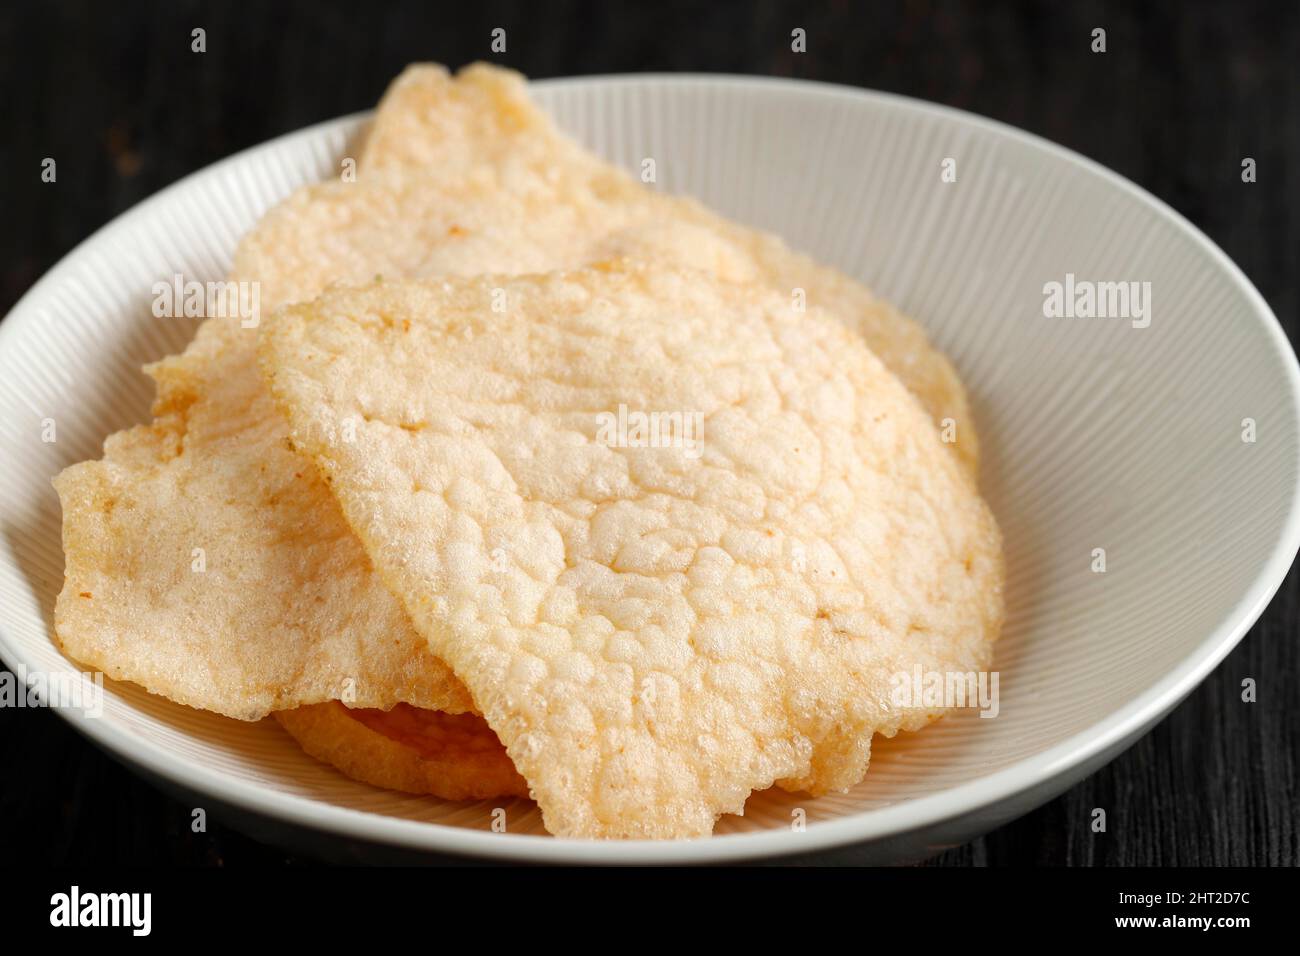 Close Up Kerupuk Udang or Shrimp Crackers or Prawn Crackers. On Wooden Table Stock Photo